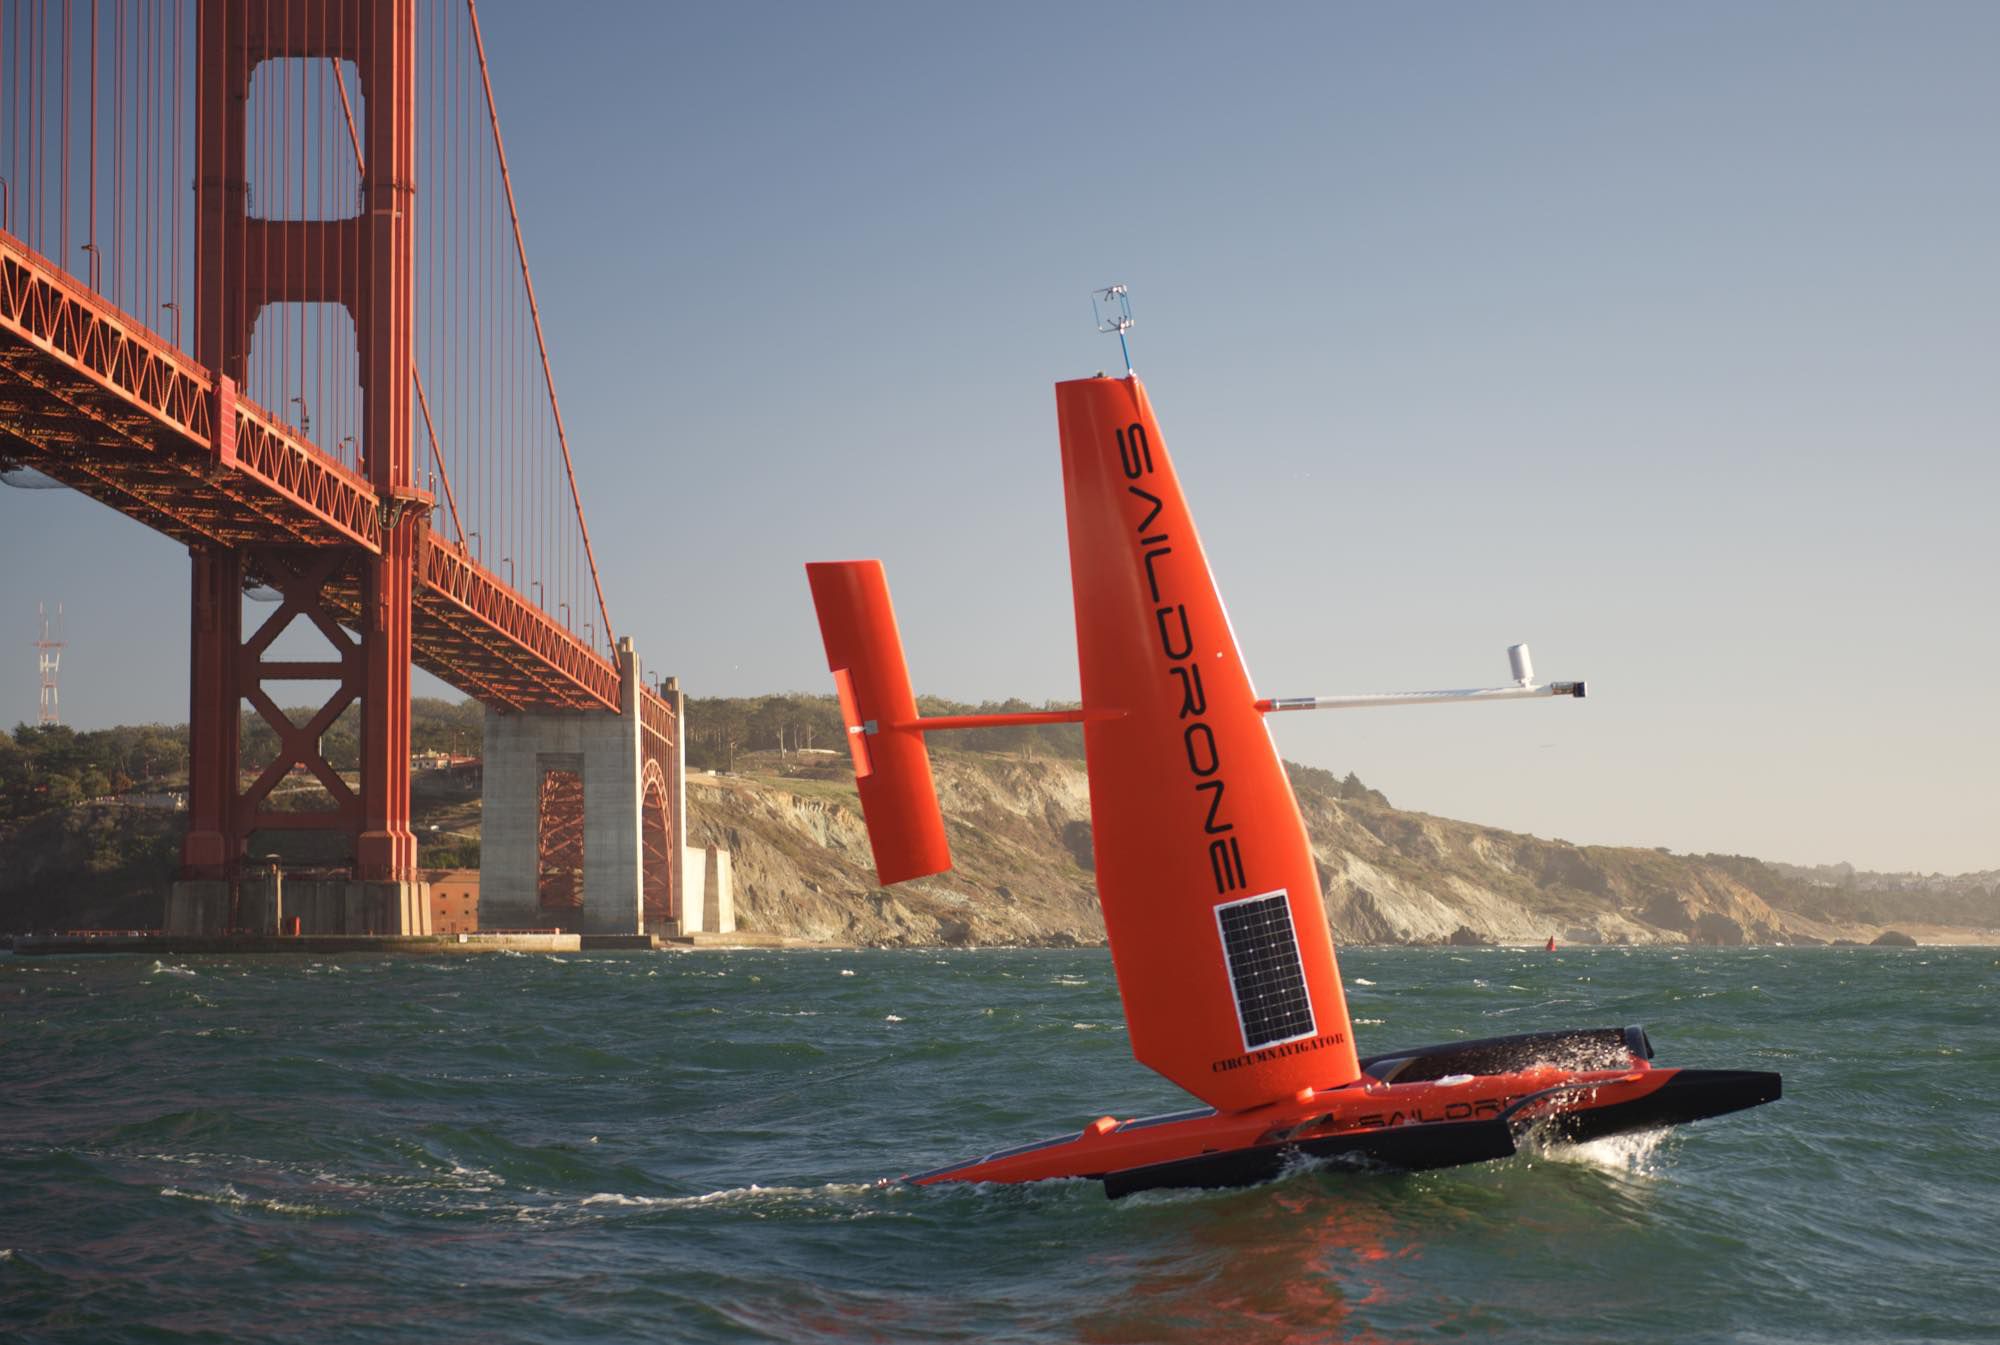 NOAA To Launch a Navy of Sailboat Drones to Monitor the Pacific Ocean